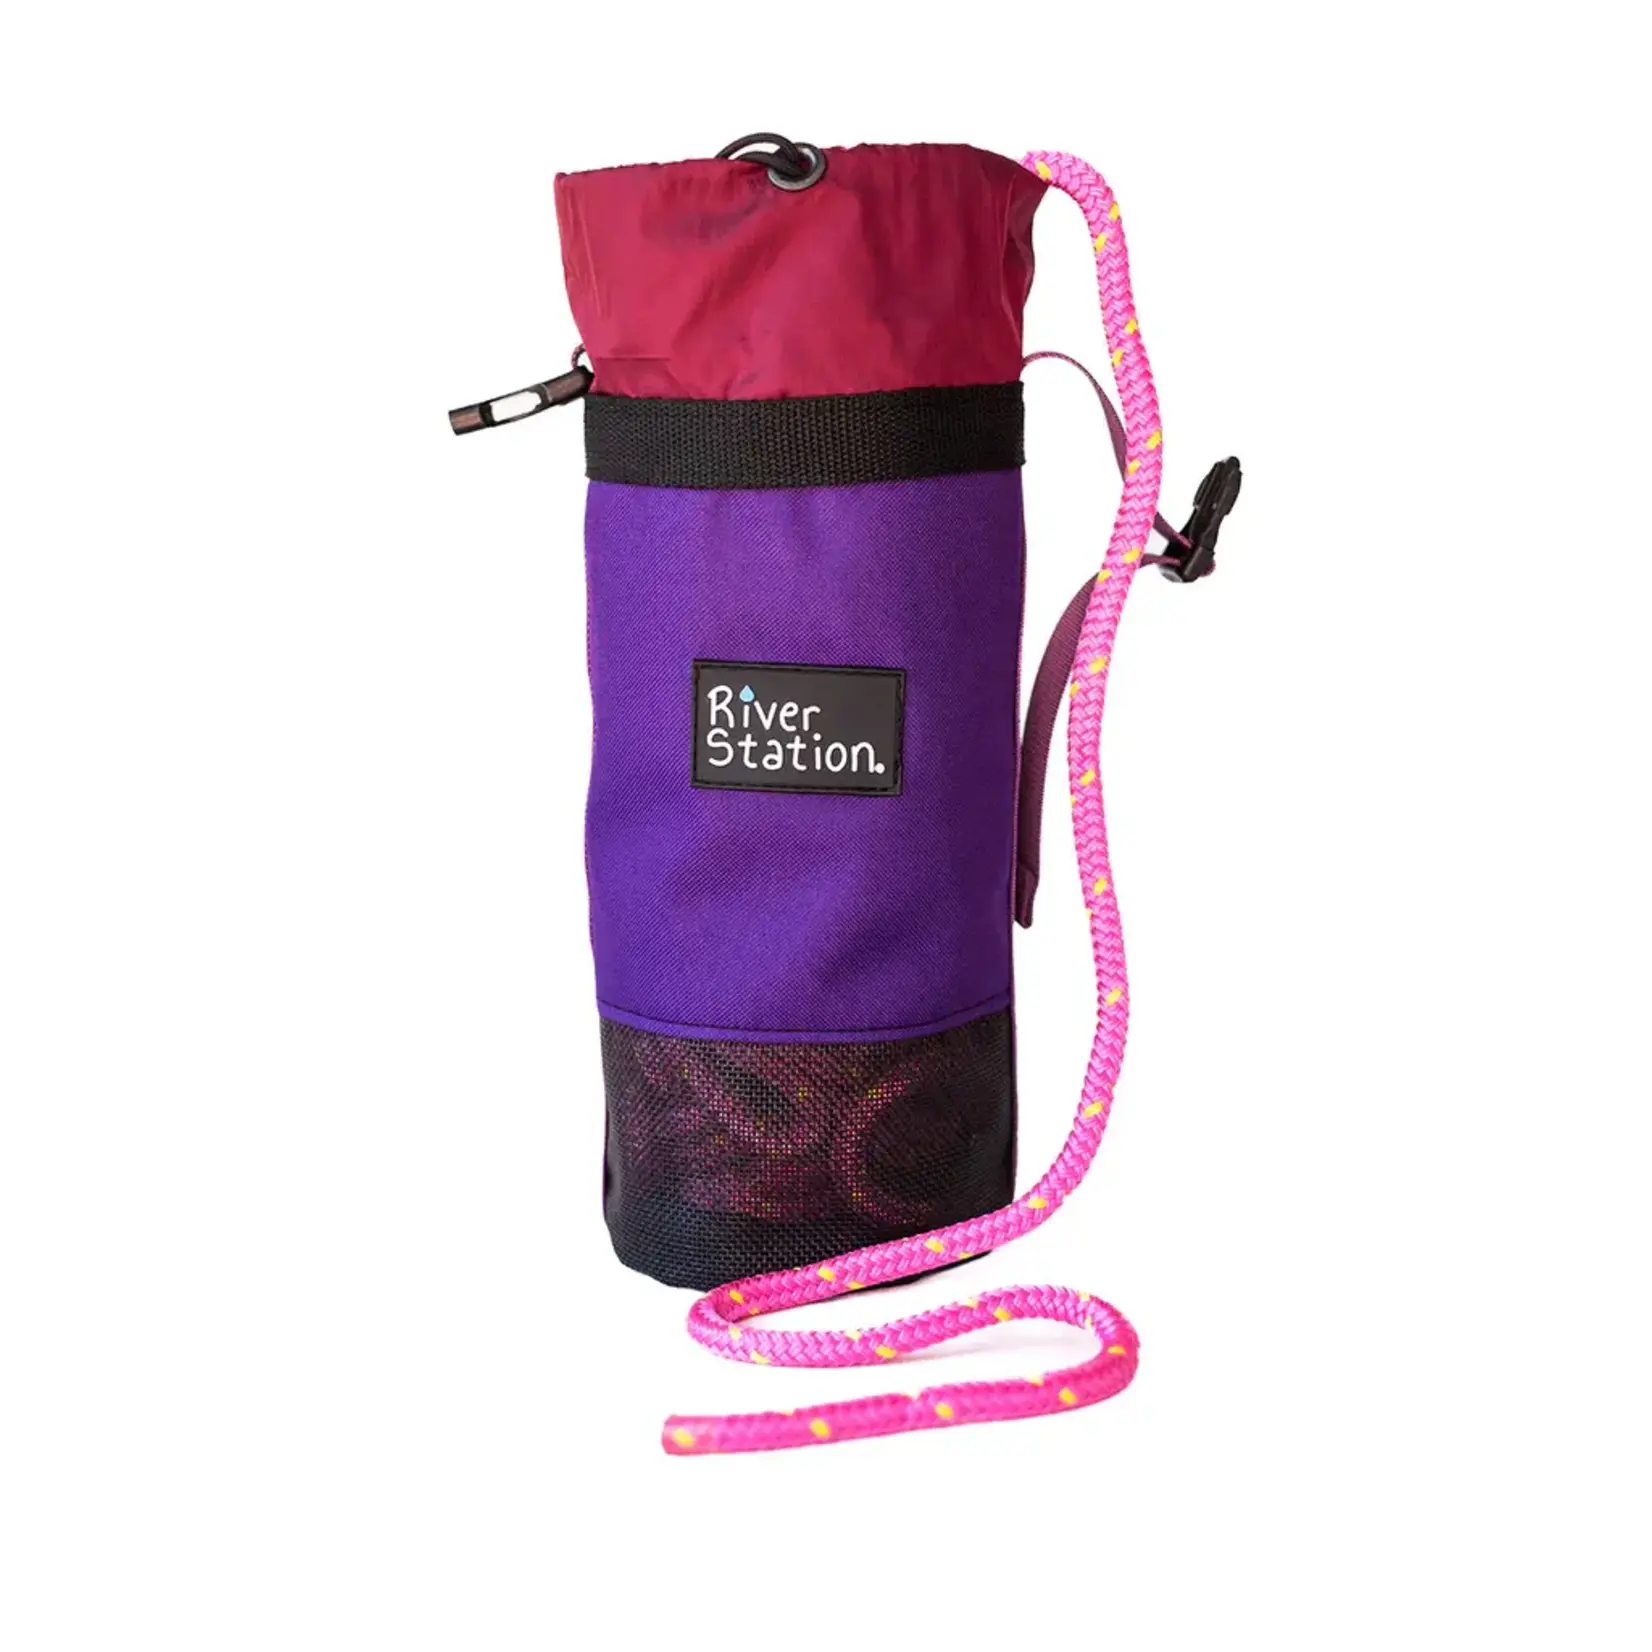 River Station Gear River Station Gear The B.O.A.T. - Classic Rescue Throw Bag - 70ft